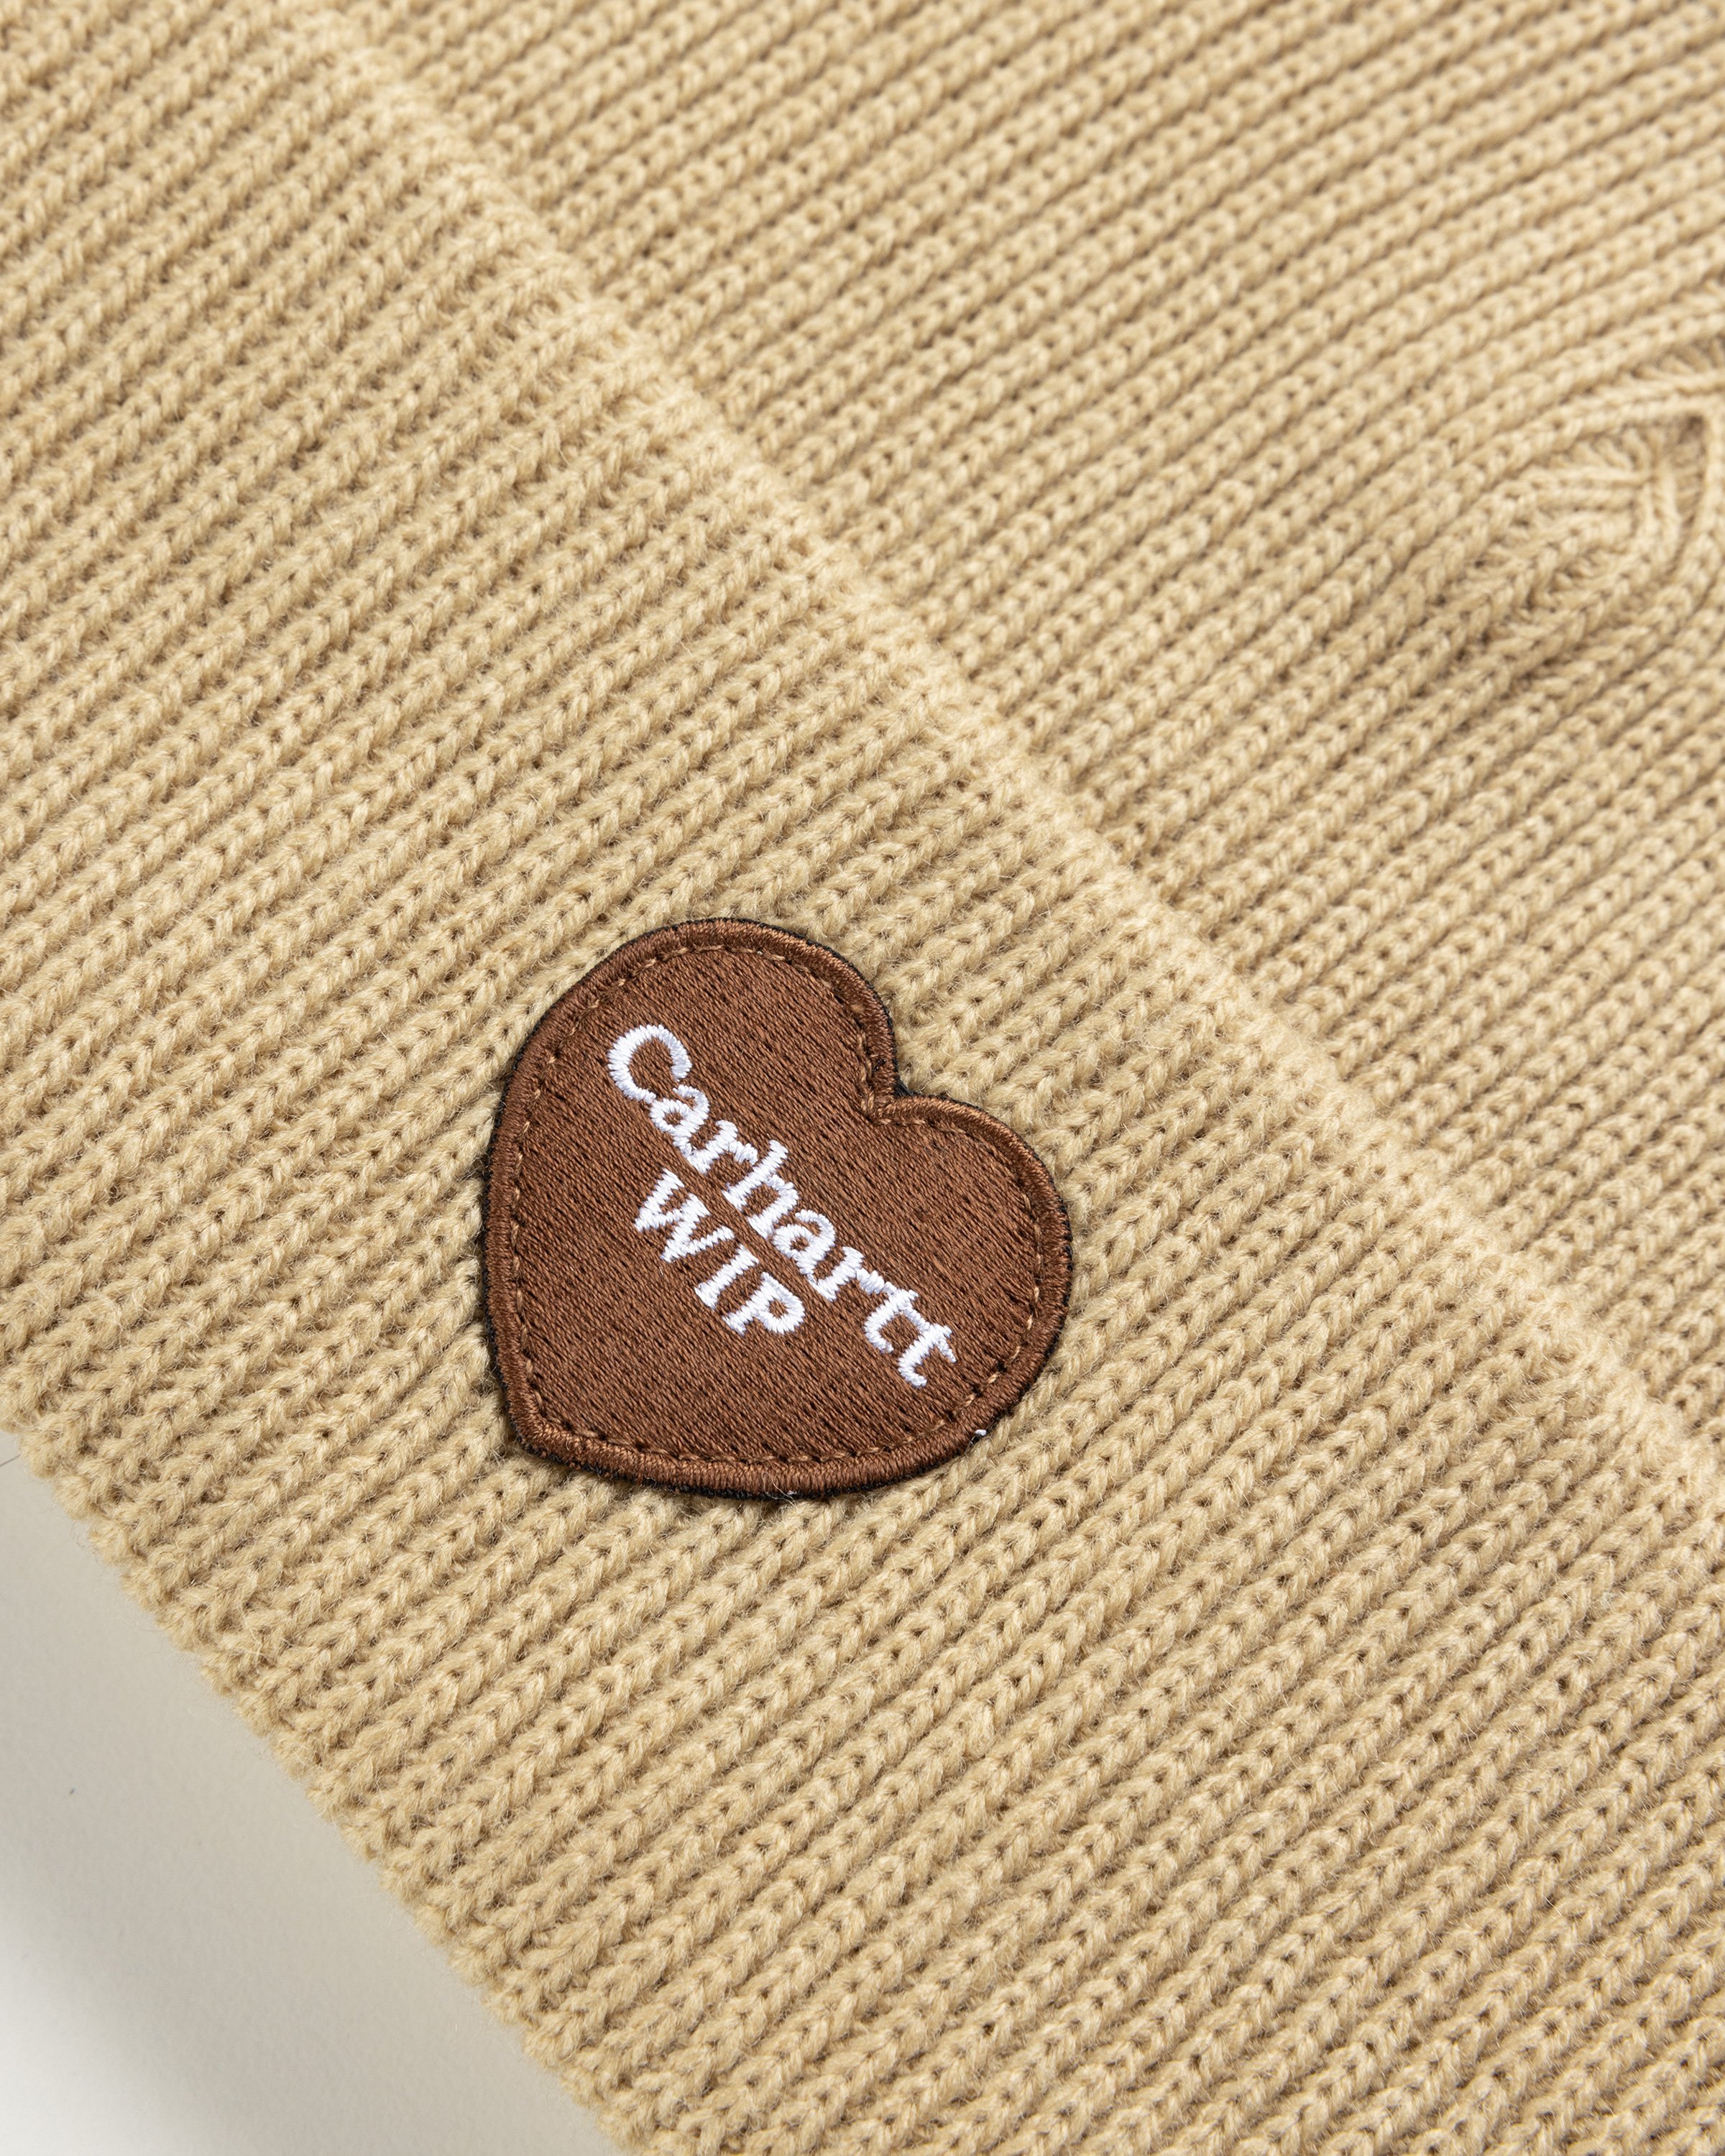 Carhartt WIP - Heart Patch Beanie Brown - Accessories - Brown - Image 3